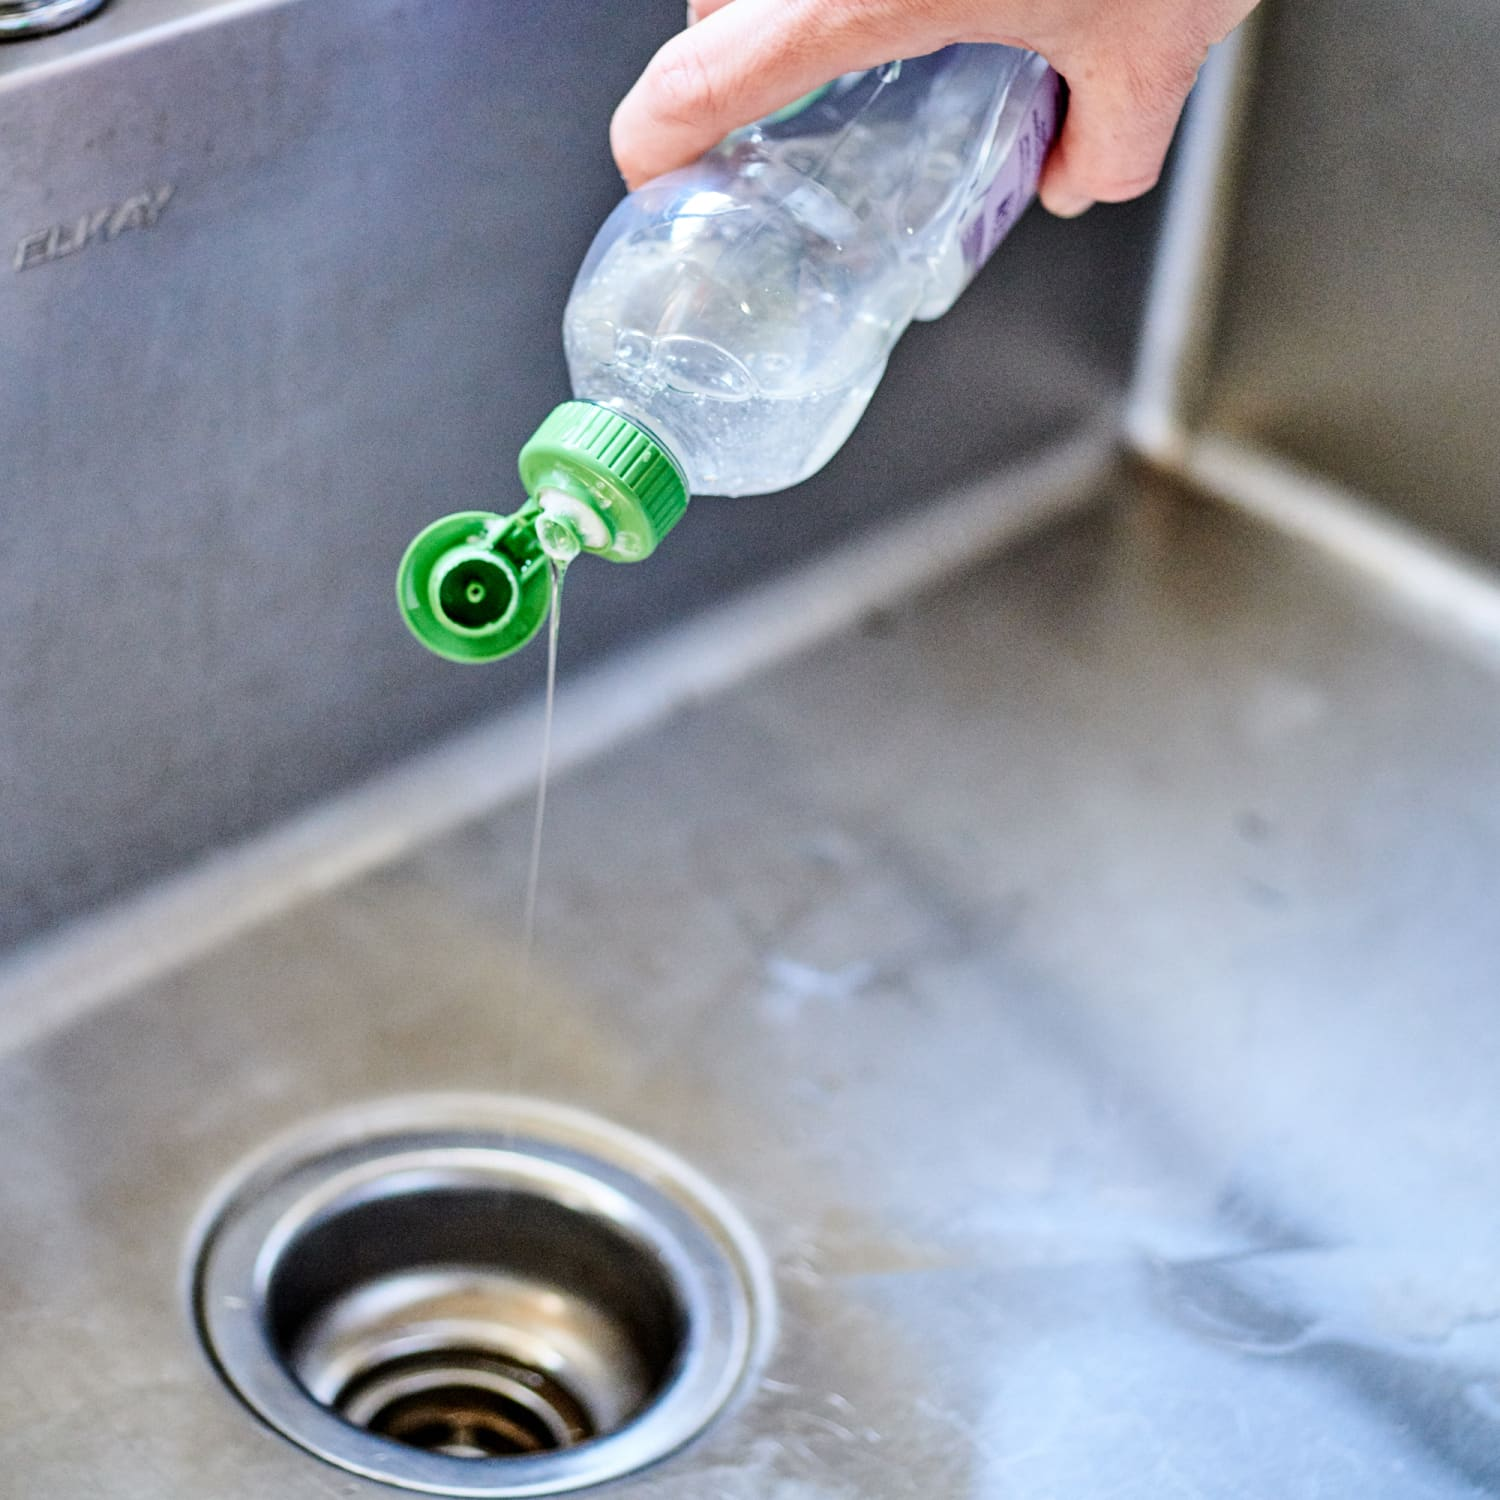 Use dish soap to clean your bathroom sink drain